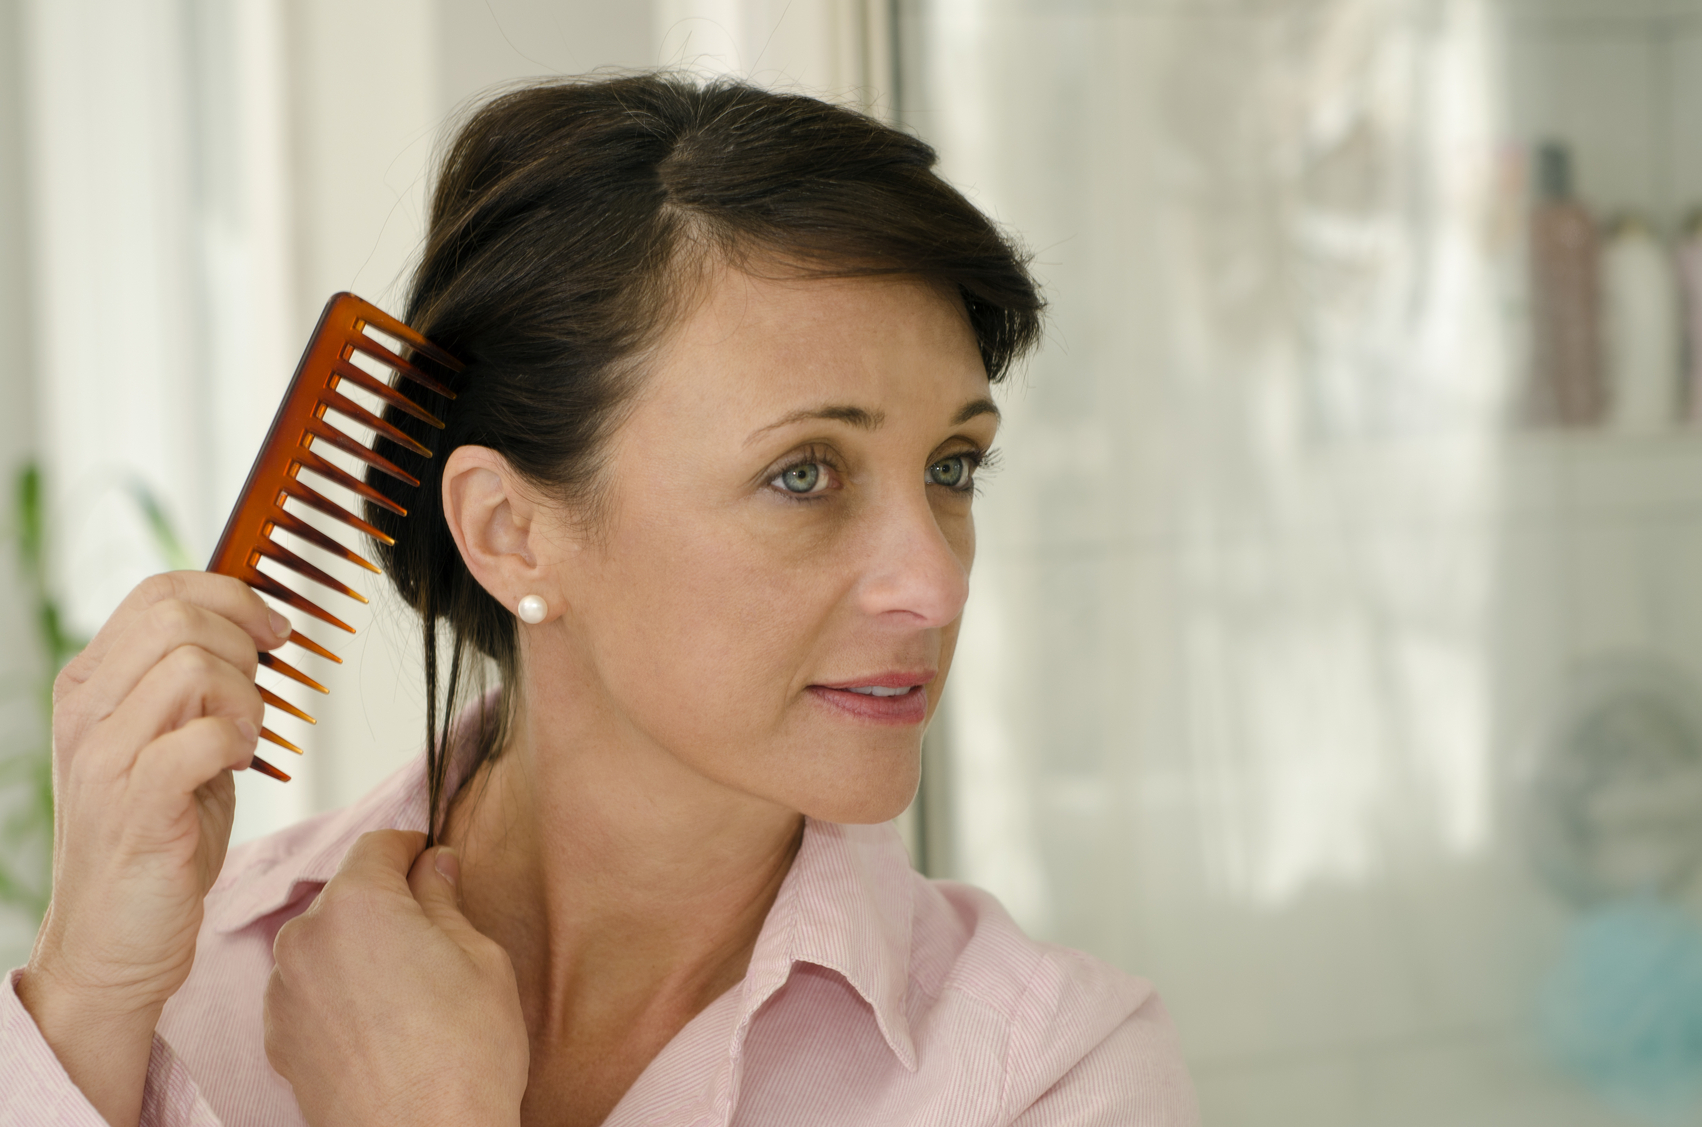 A woman in a pink shirt combs her hair